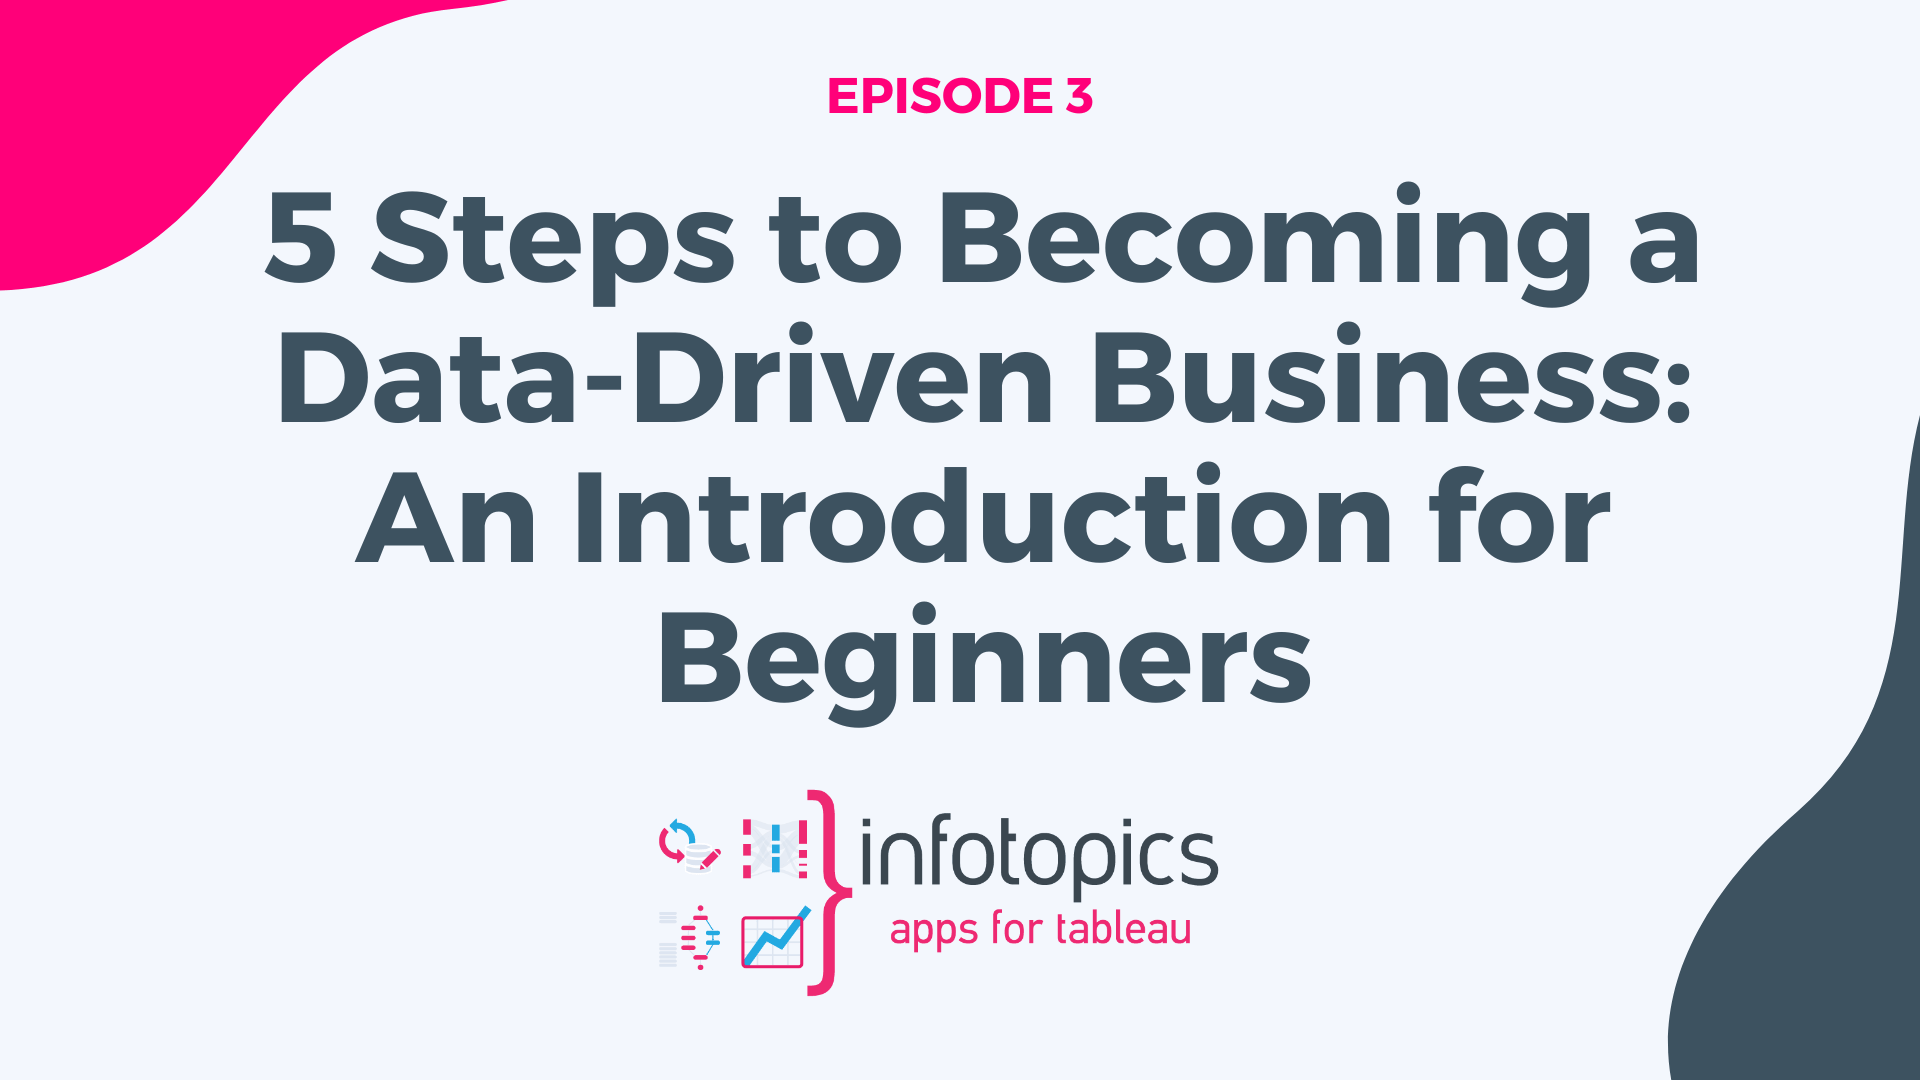 5 Steps to Becoming a Data-Driven Business: An Introduction to Data Analytics for Beginners!